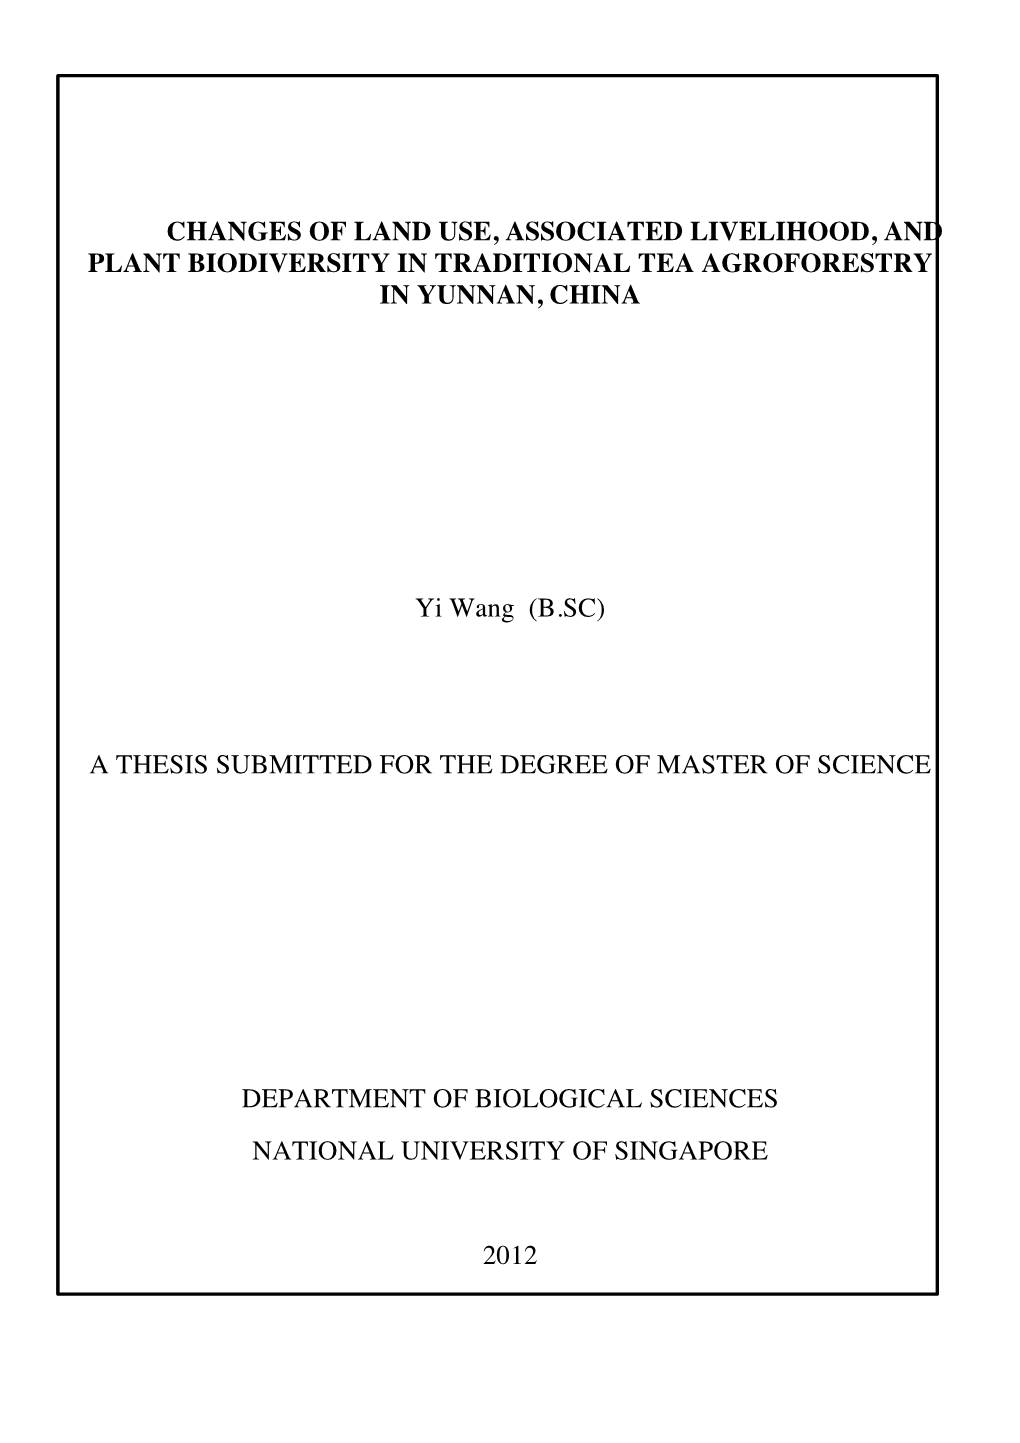 Changes of Land Use, Associated Livelihood, and Plant Biodiversity in Traditional Tea Agroforestry in Yunnan, China